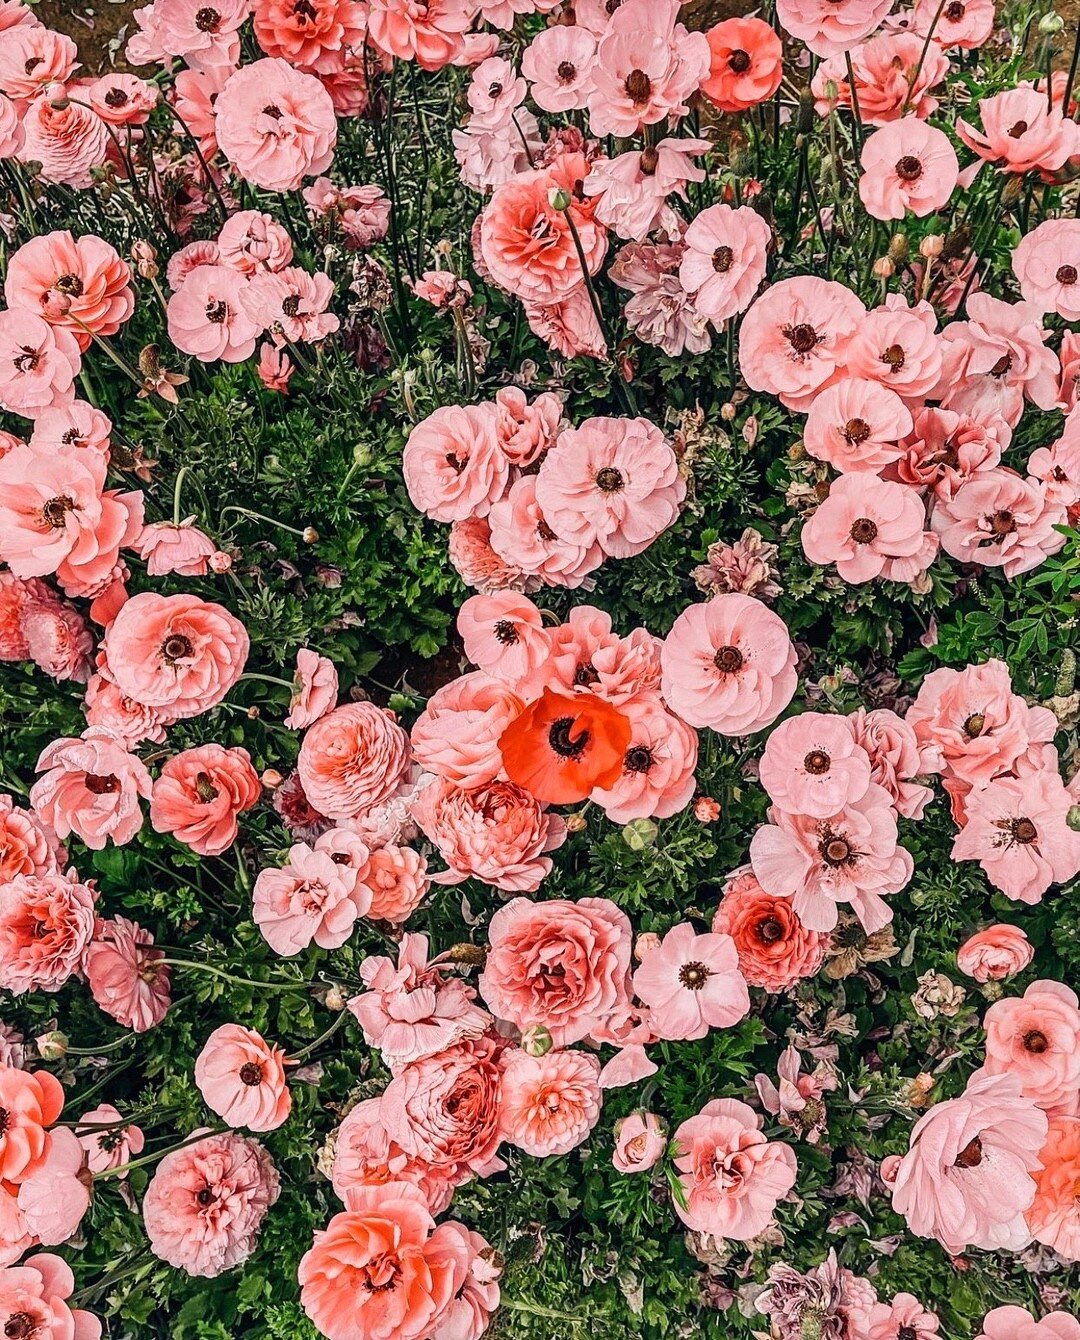 Take time to smell the roses (or poppies) this week!​​​​​​​​
✨